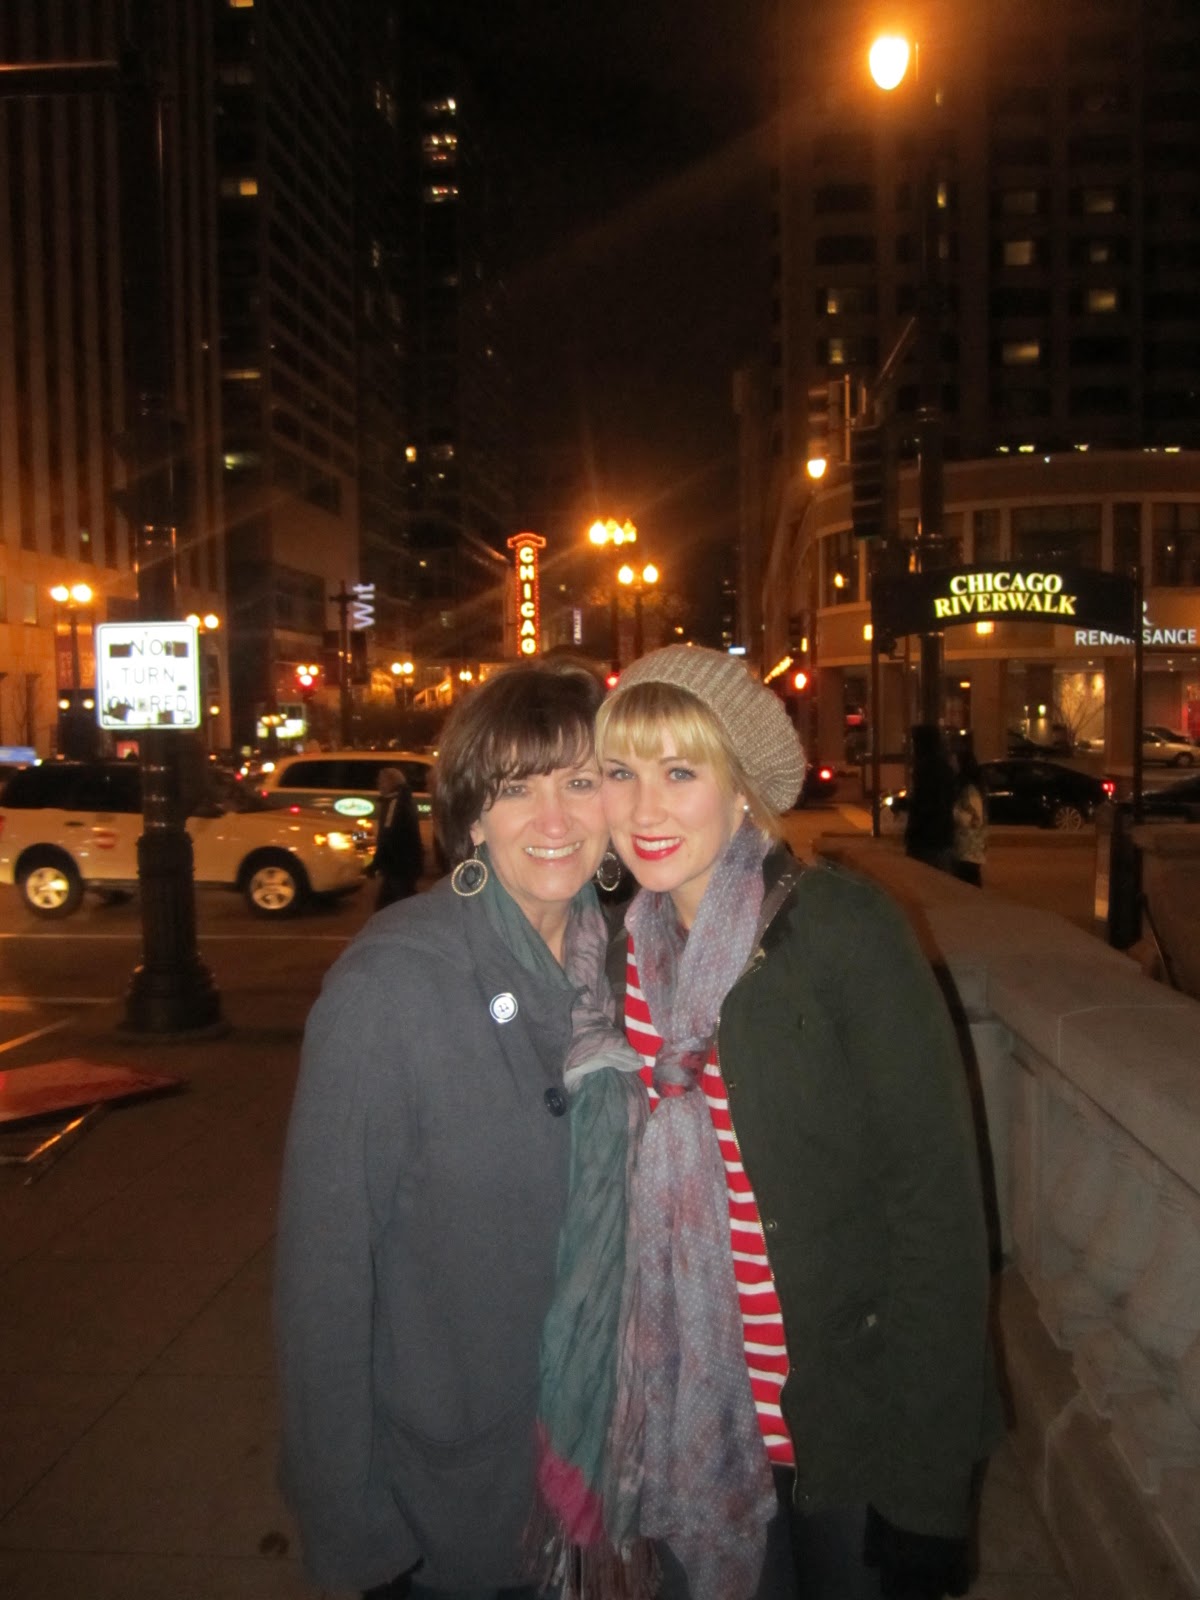 Notes in the Key of Life: A Mother-Daughter Trip to Chicago